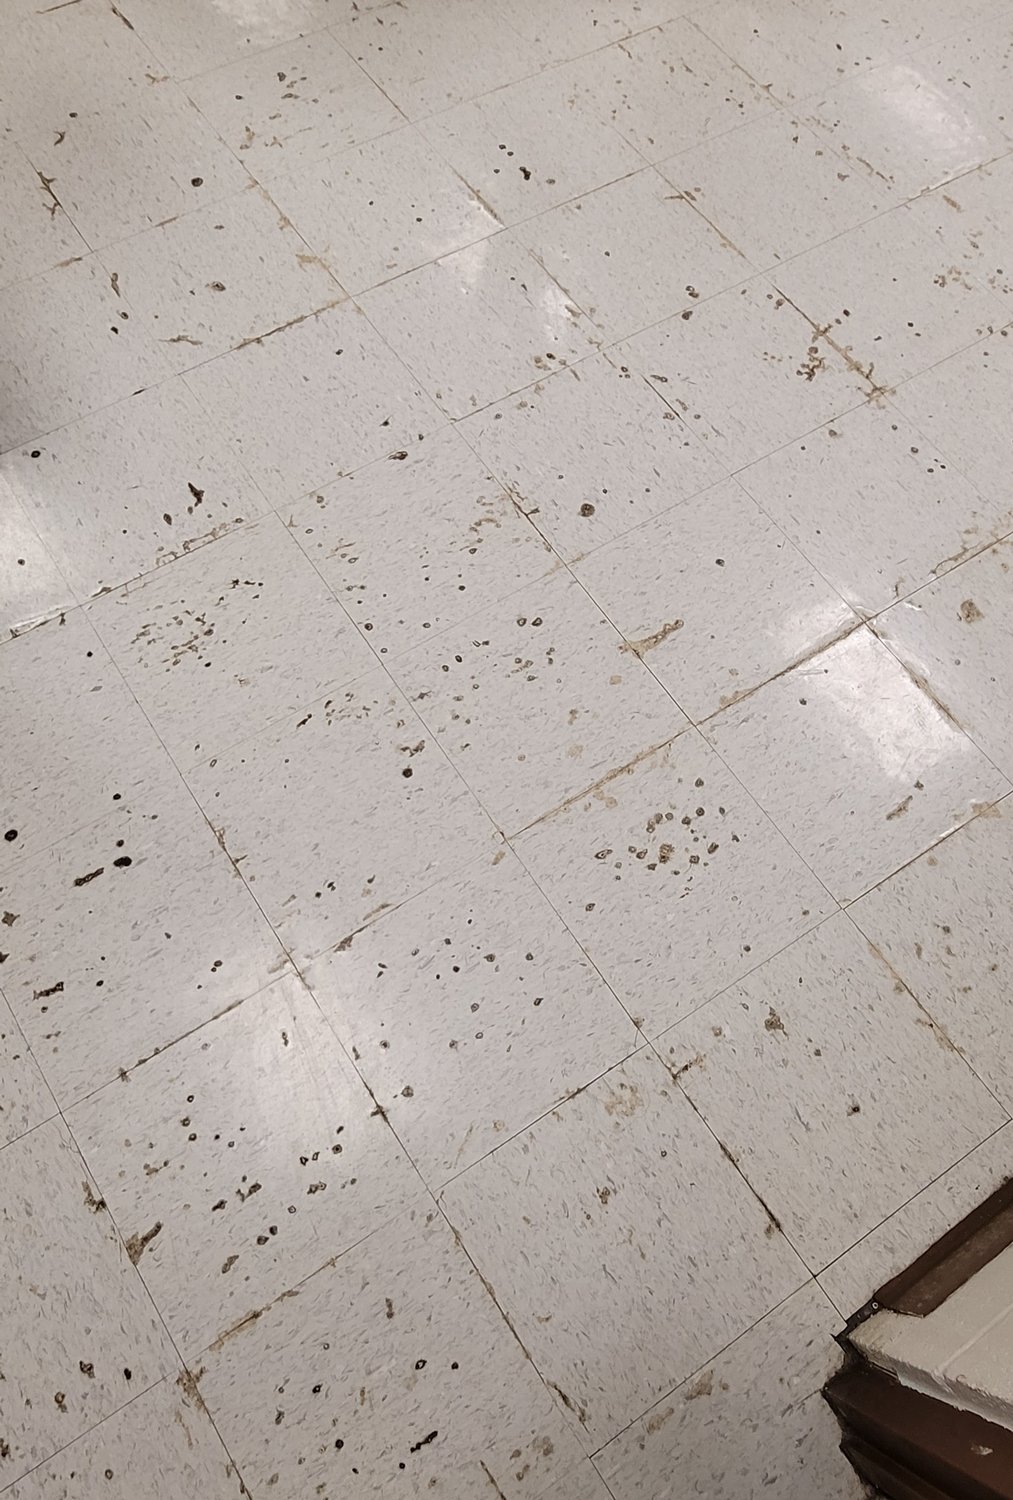 Despite being refinished over the summer in 2020, the band and choir hall floor at Royal Junior High shows damage from moisture. Staff said the air conditioning units in the building that pull excess moisture from the air are no longer working efficiently which causes problems with moisture damage throughout the campus.